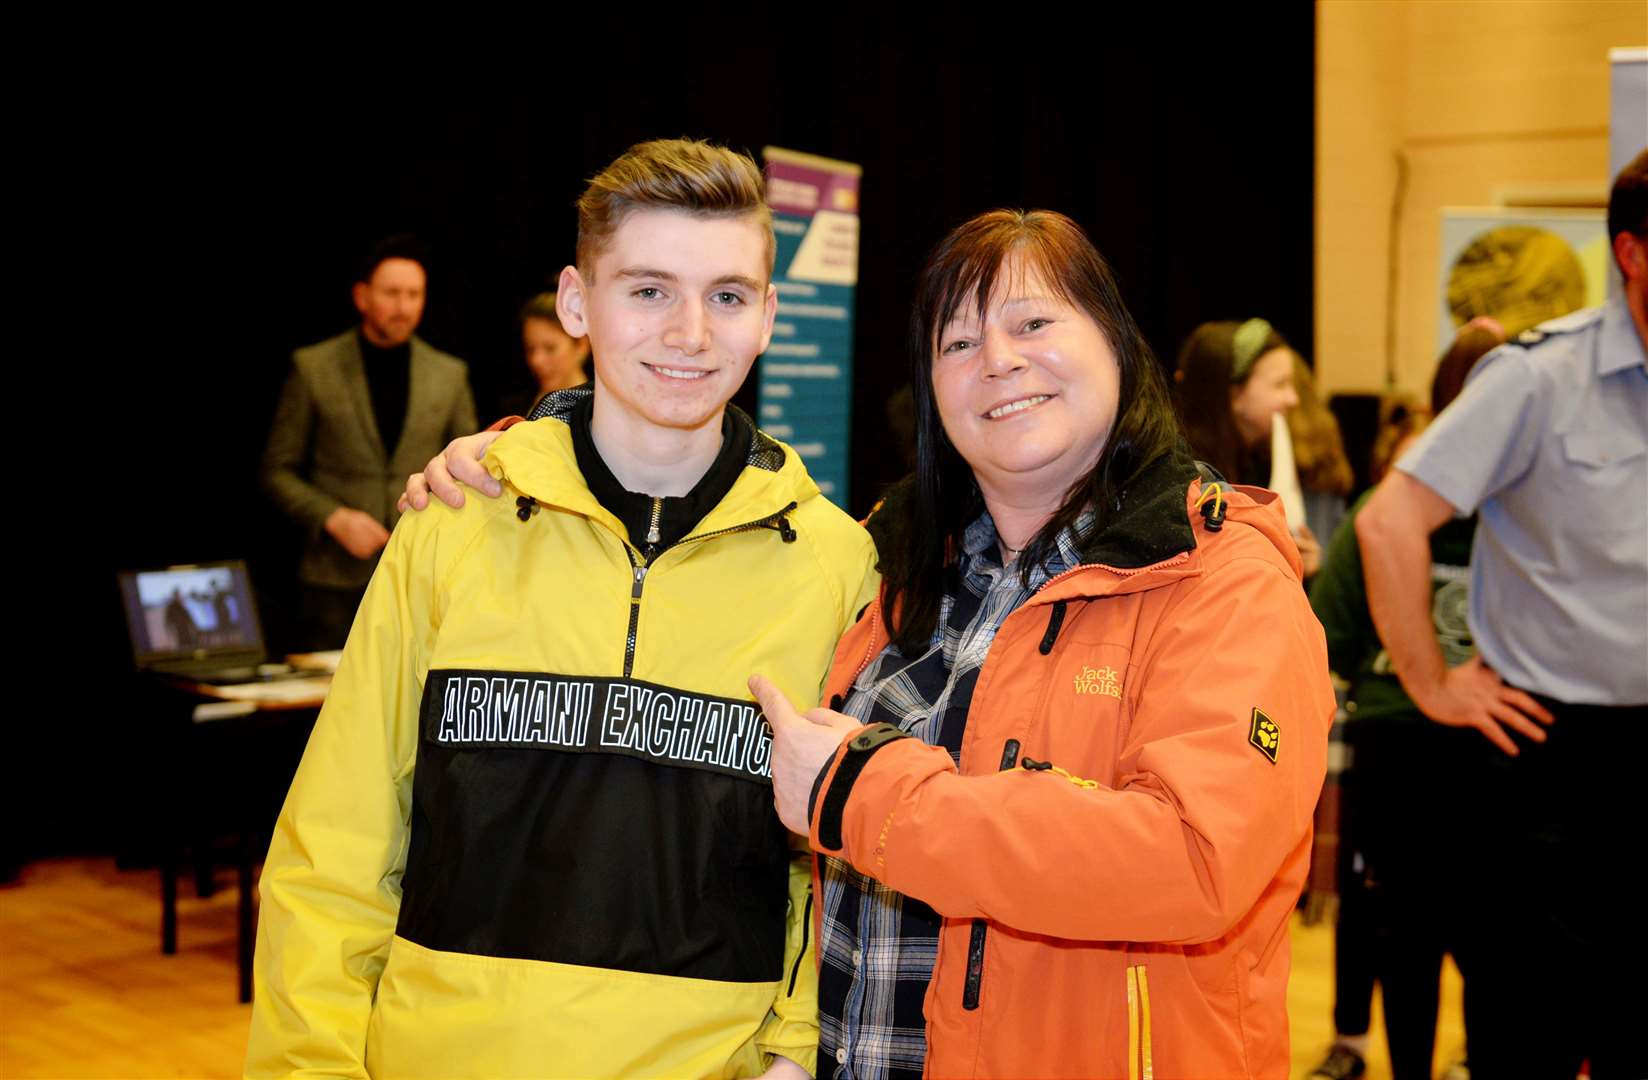 Fintan Grant with his mum Sonya at he careers event.